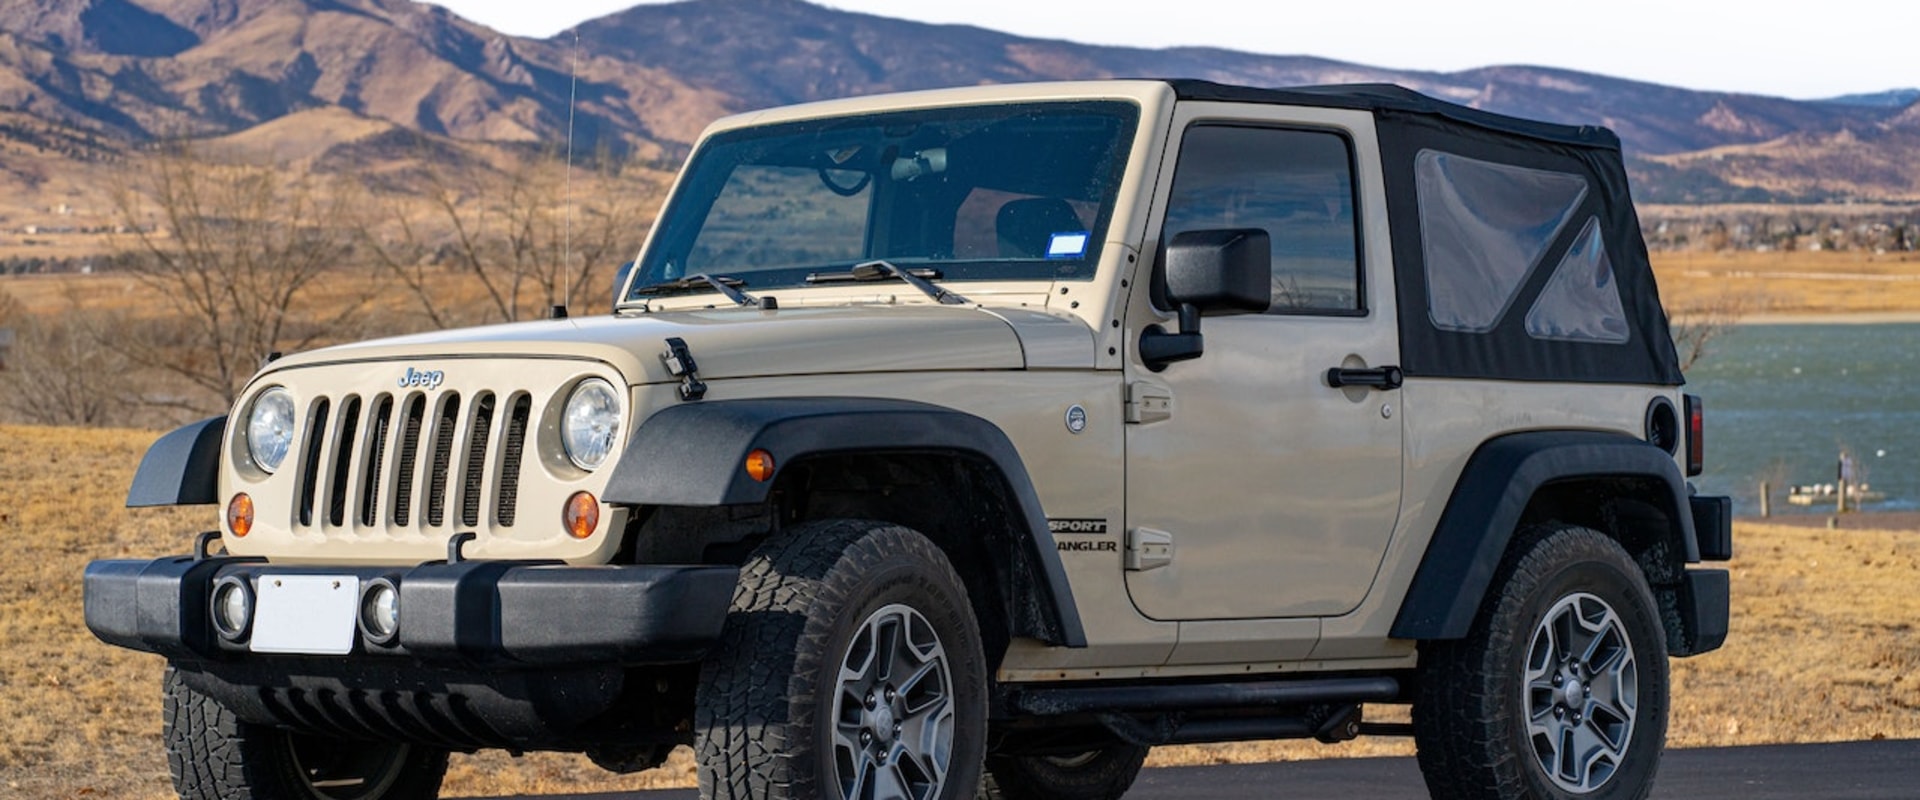 Next-Level Adventures: Rent A Jeep In Kona, Hawaii And Discover Military Trucks For Sale Or Rent